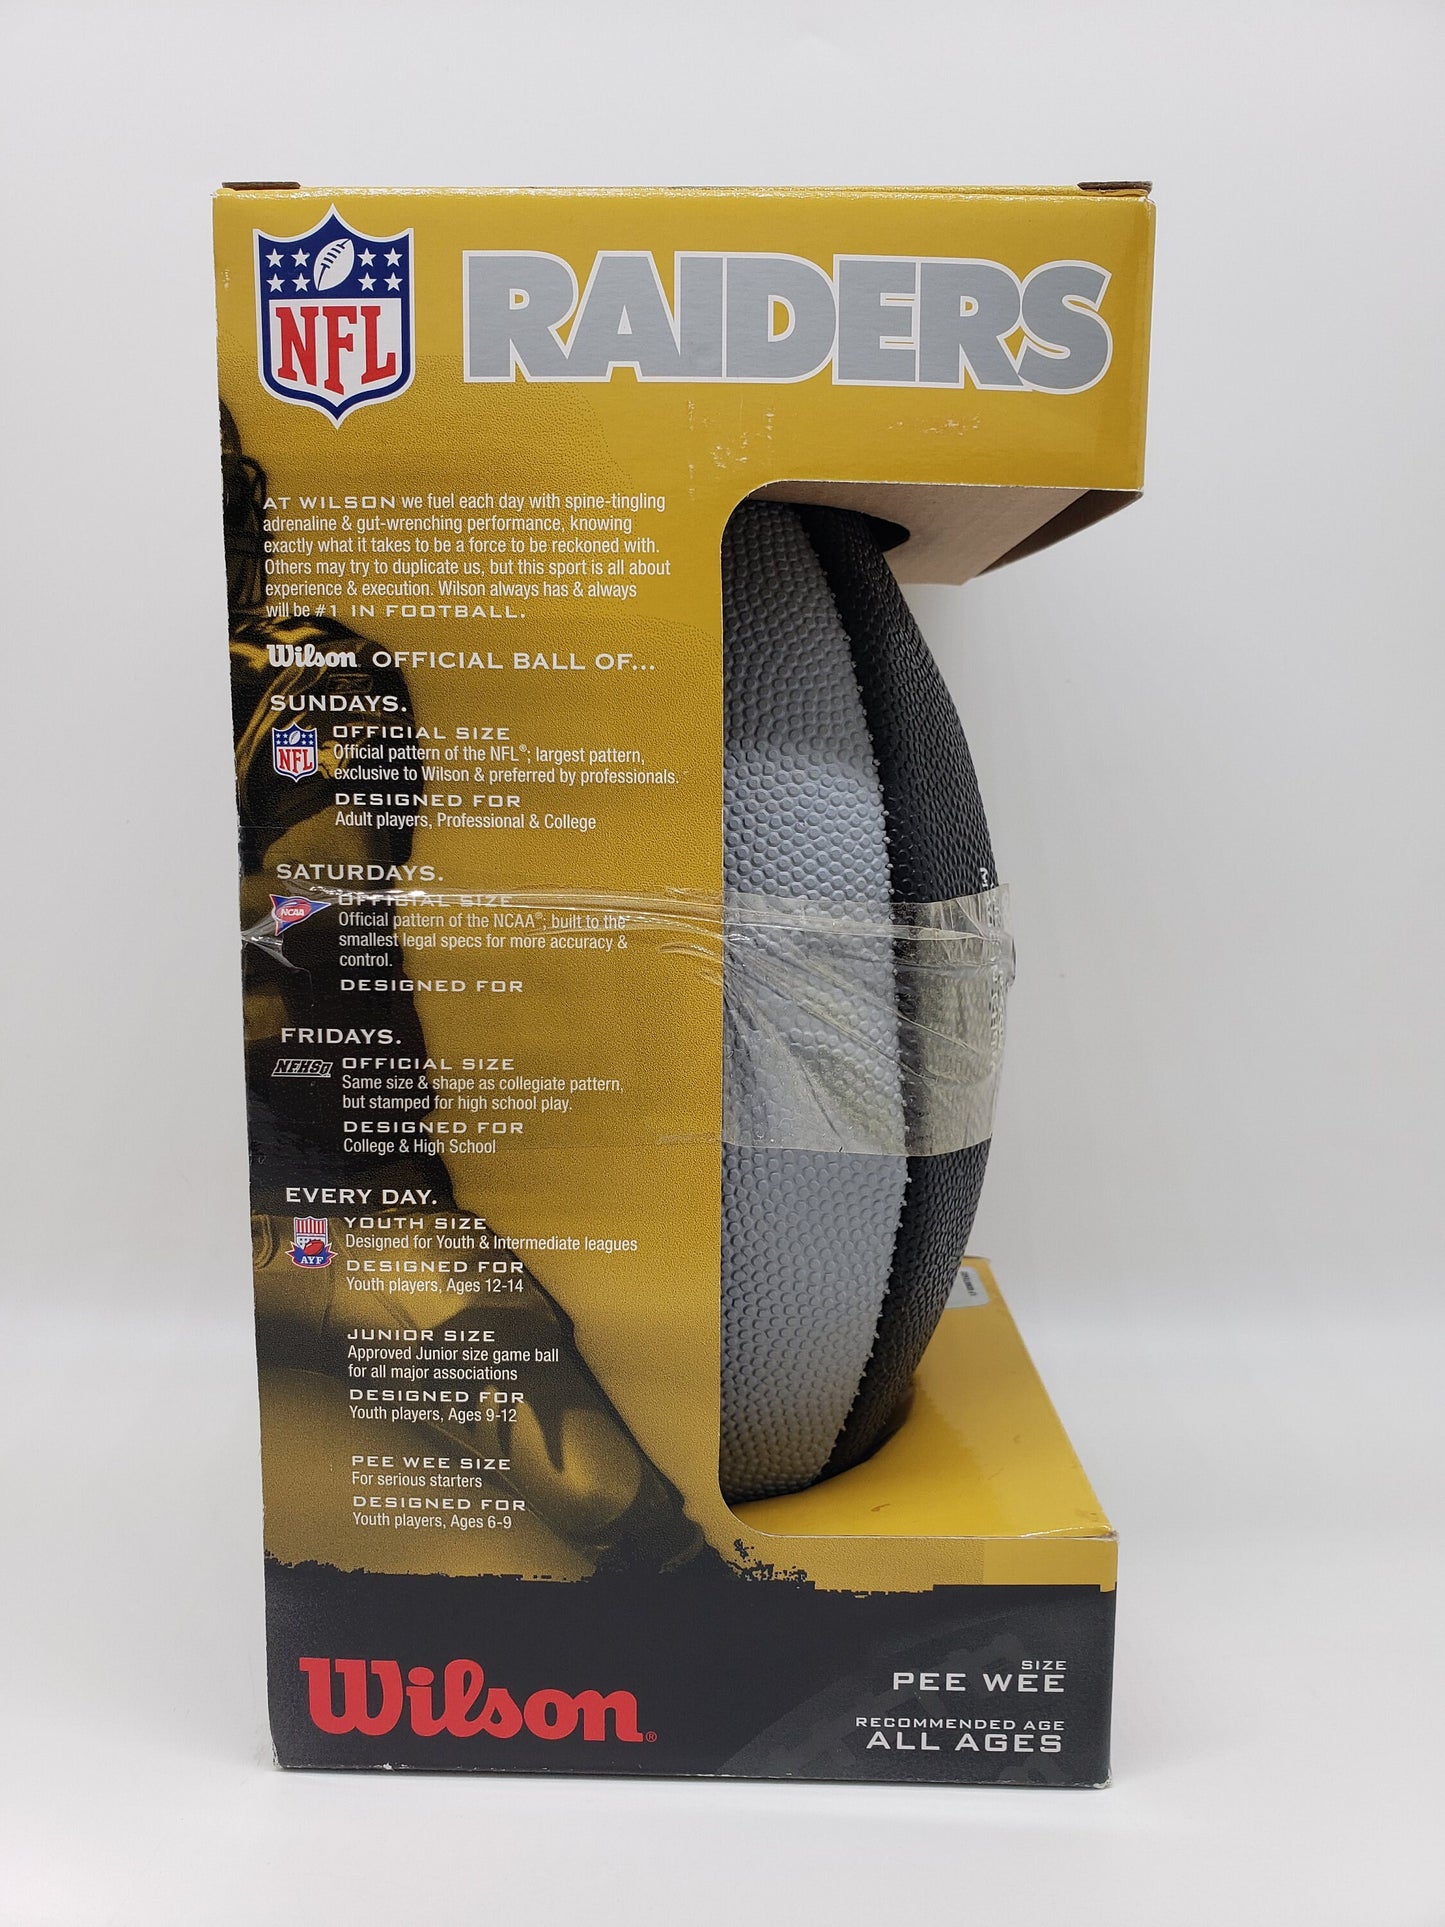 Raiders Silver and Black Pee Wee Football Wilson Collectable Miniature NFL Raiders Football Man Cave Decor Perfect Birthday Gift